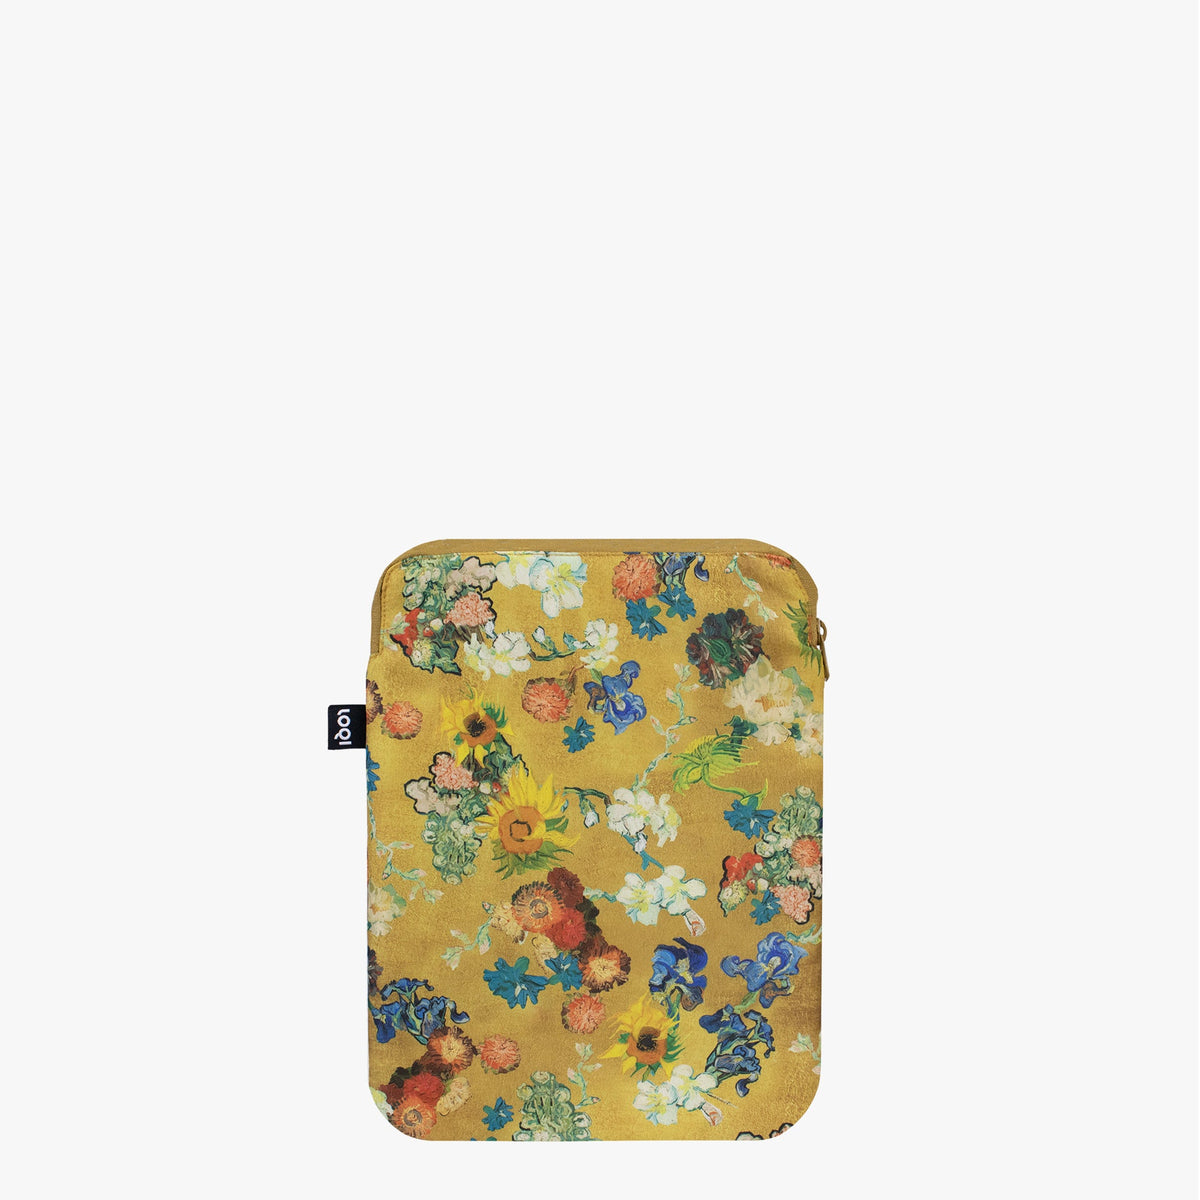 Flower Pattern Gold Recycled Laptop Sleeve 24 x 33 cm